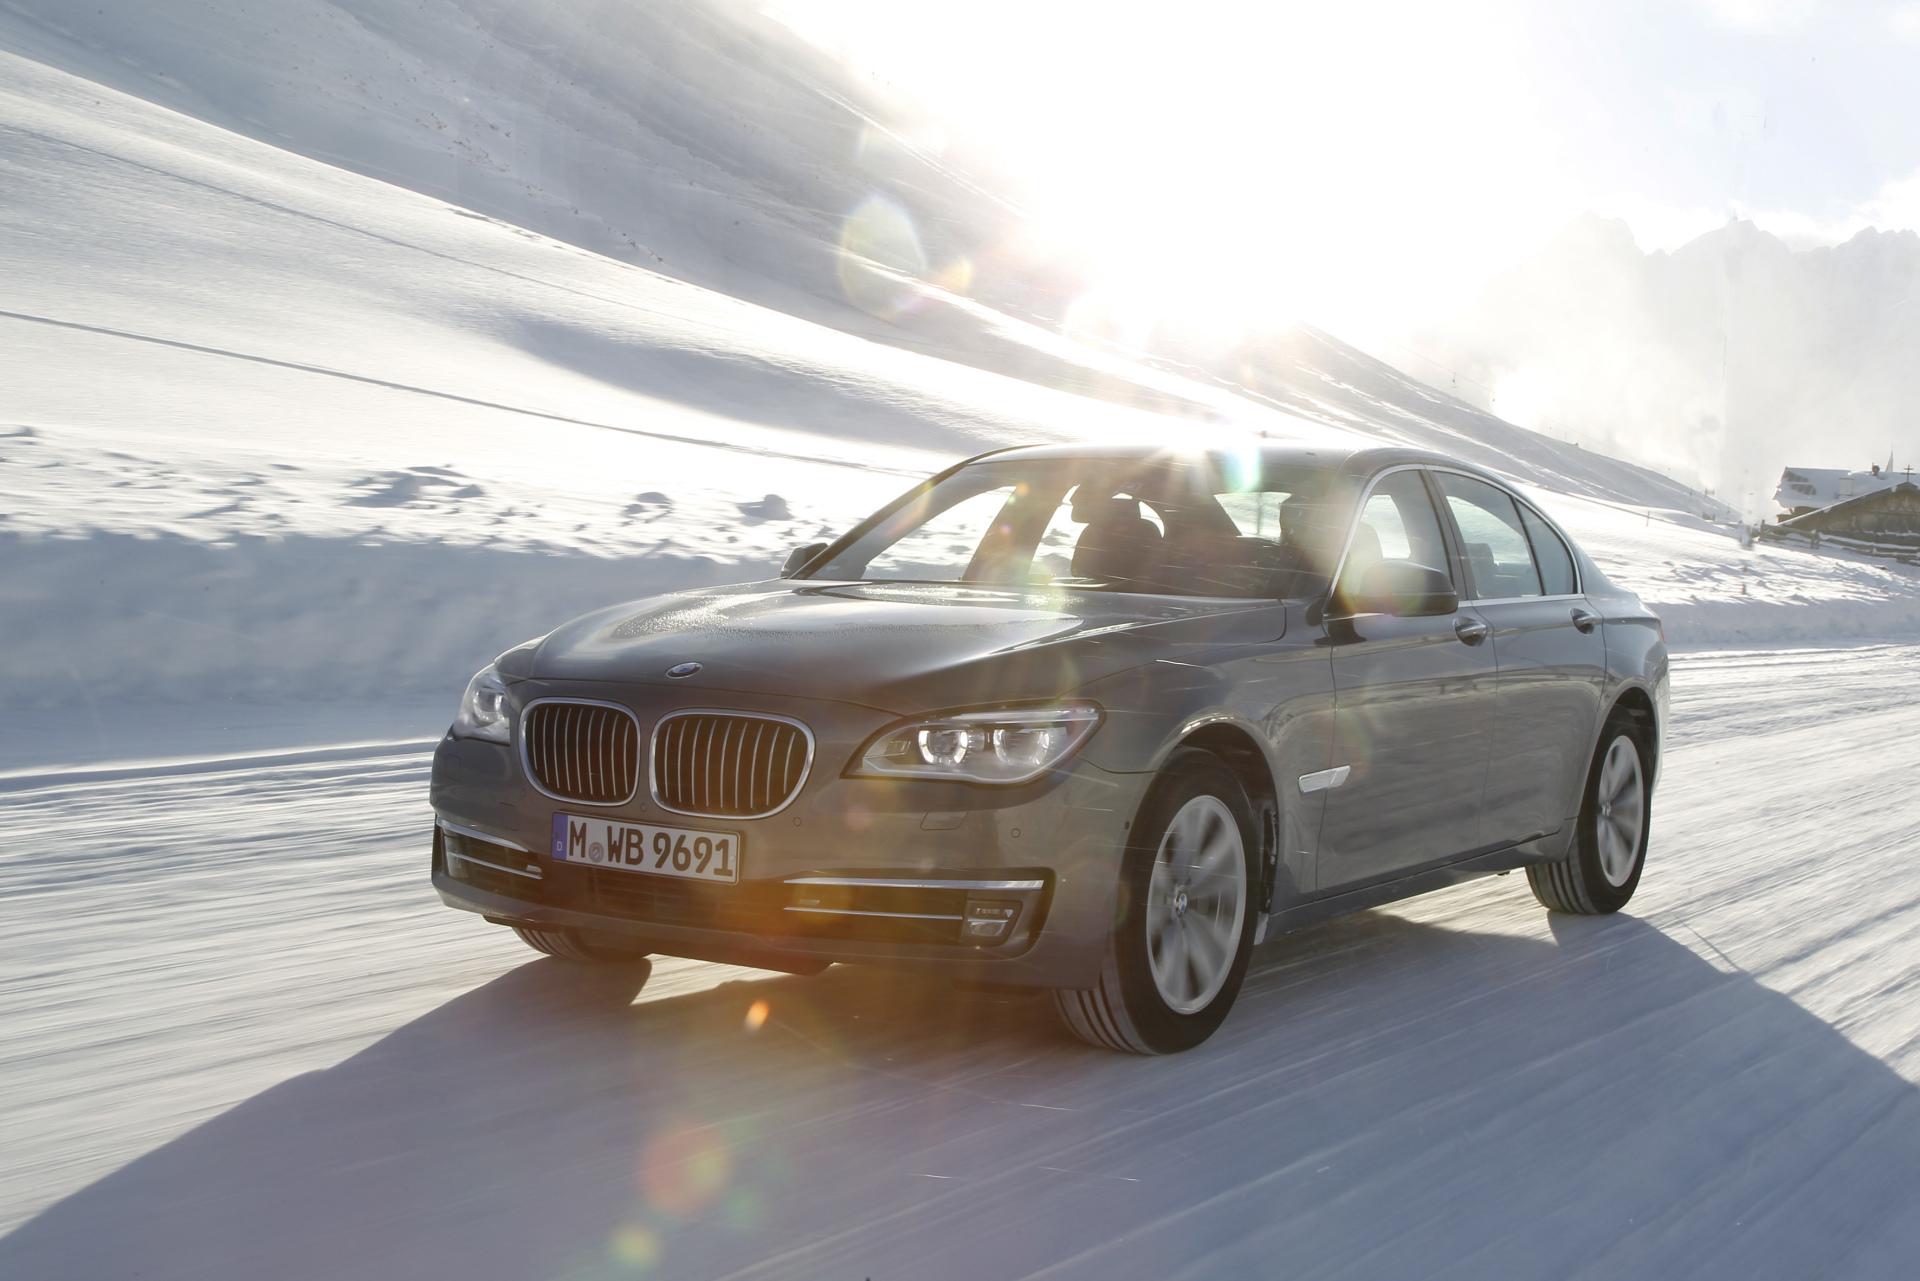 2013 Bmw 7-series wallpapers HD quality